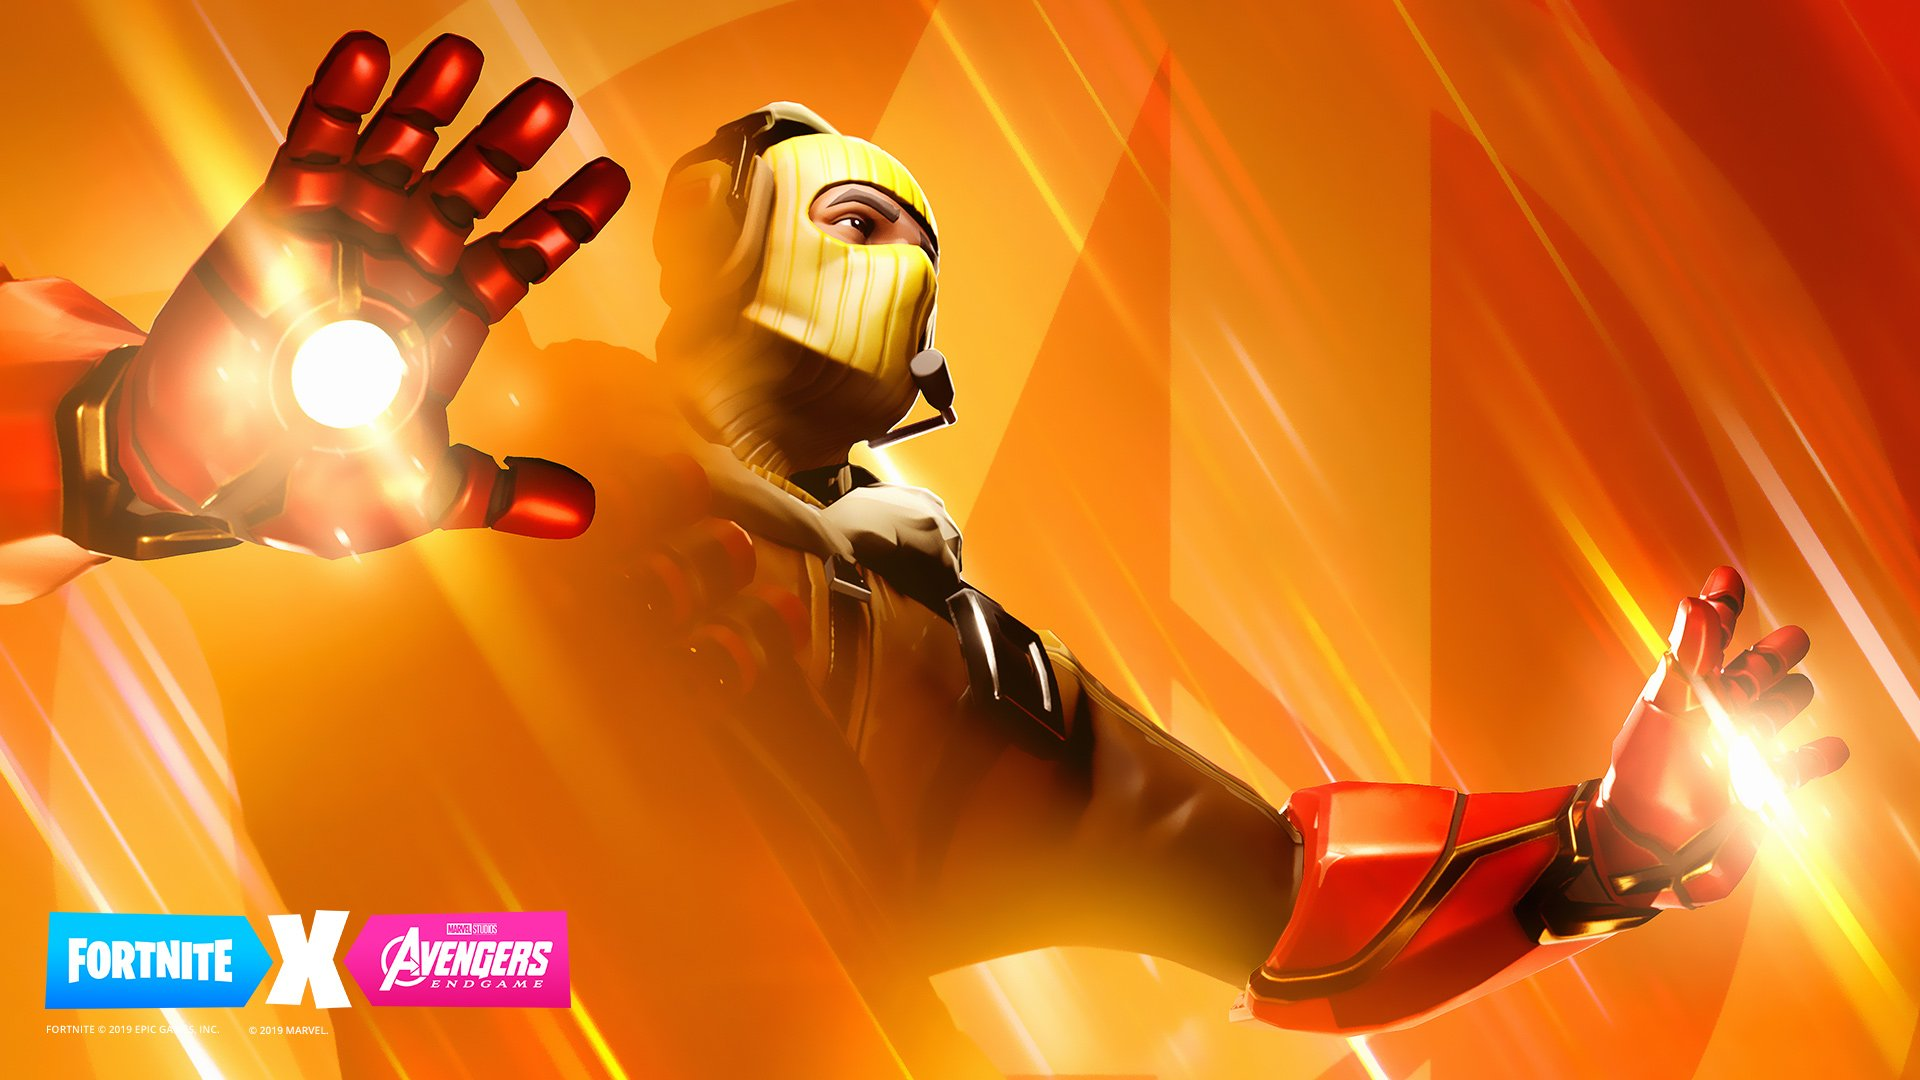 Fortnite X Avengers, What we know so far!